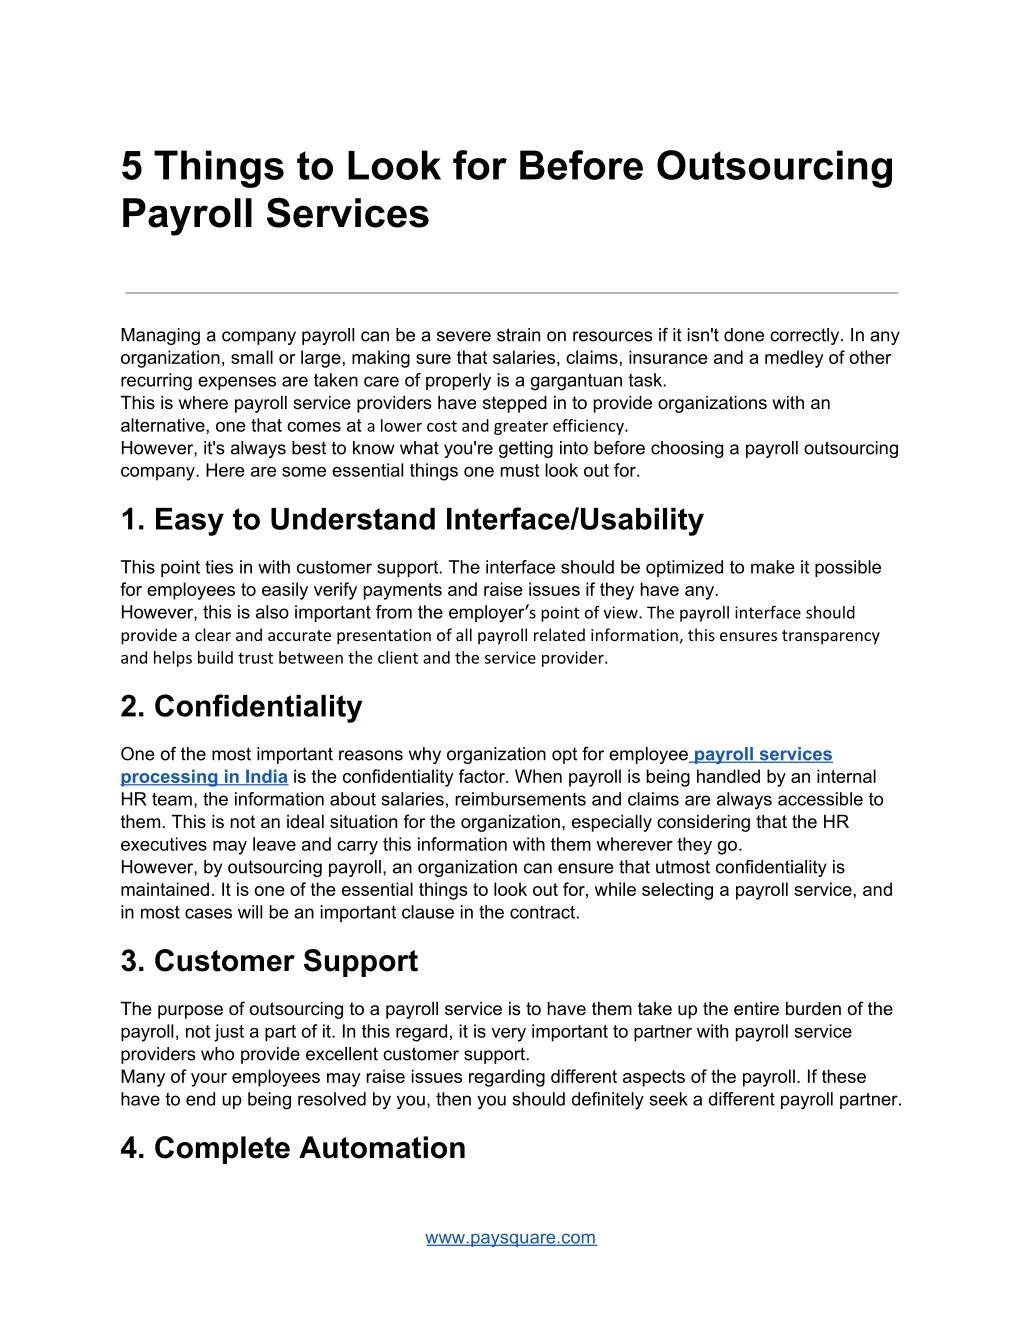 5 things to look for before outsourcing payroll